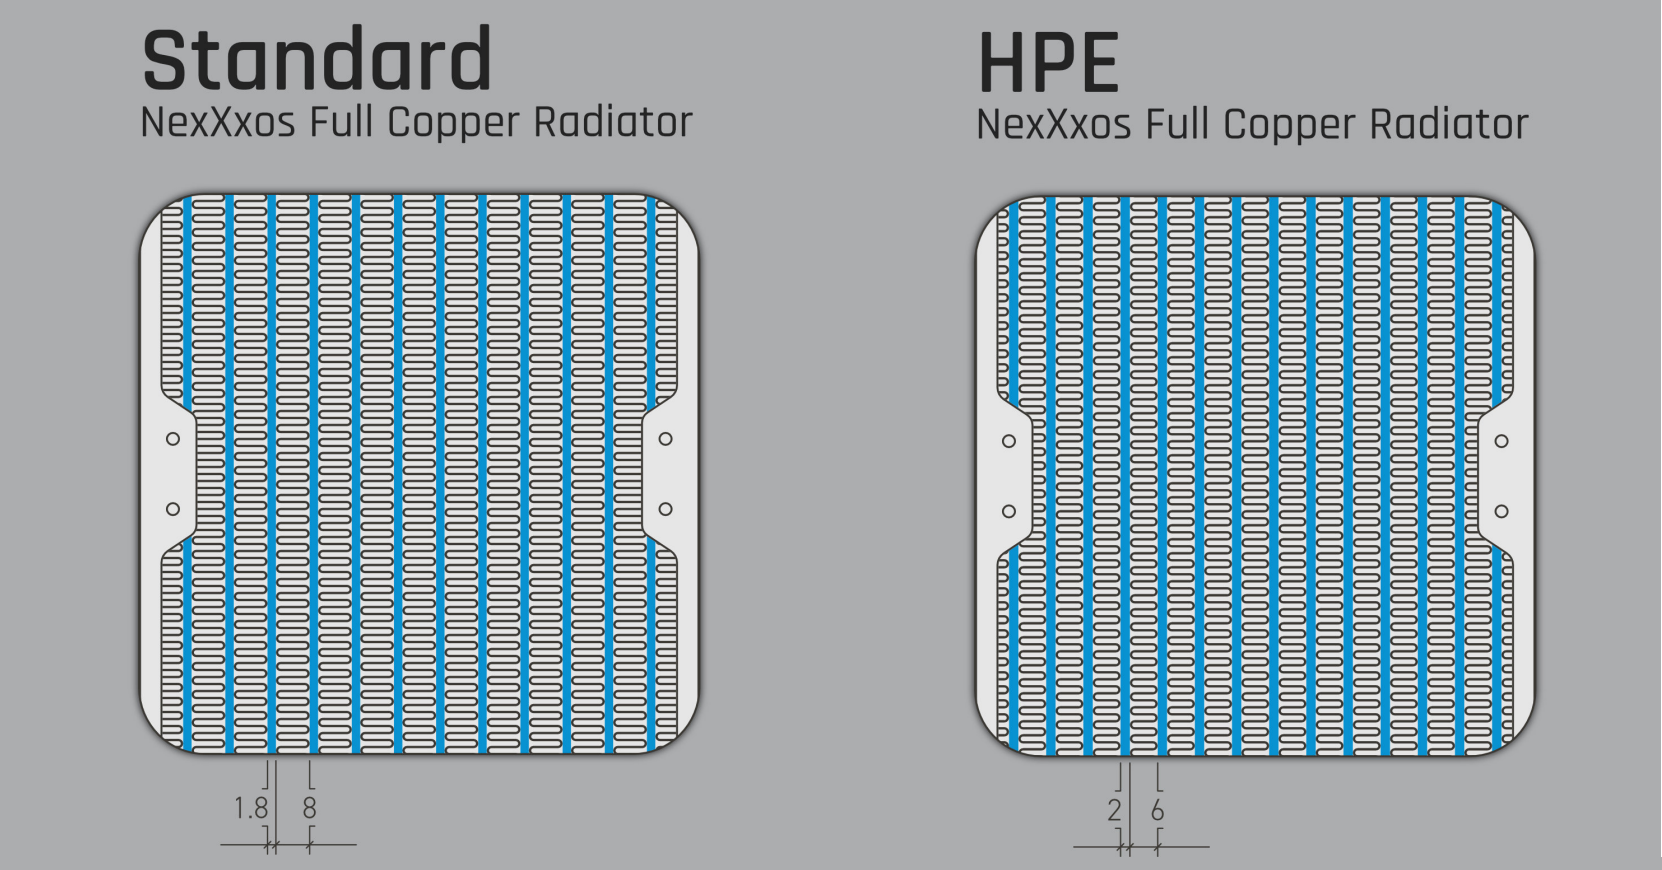 ALPHACOOL Eisbaer Pro HPE Aurora 360 AIO — HPE and non-HPE radiators